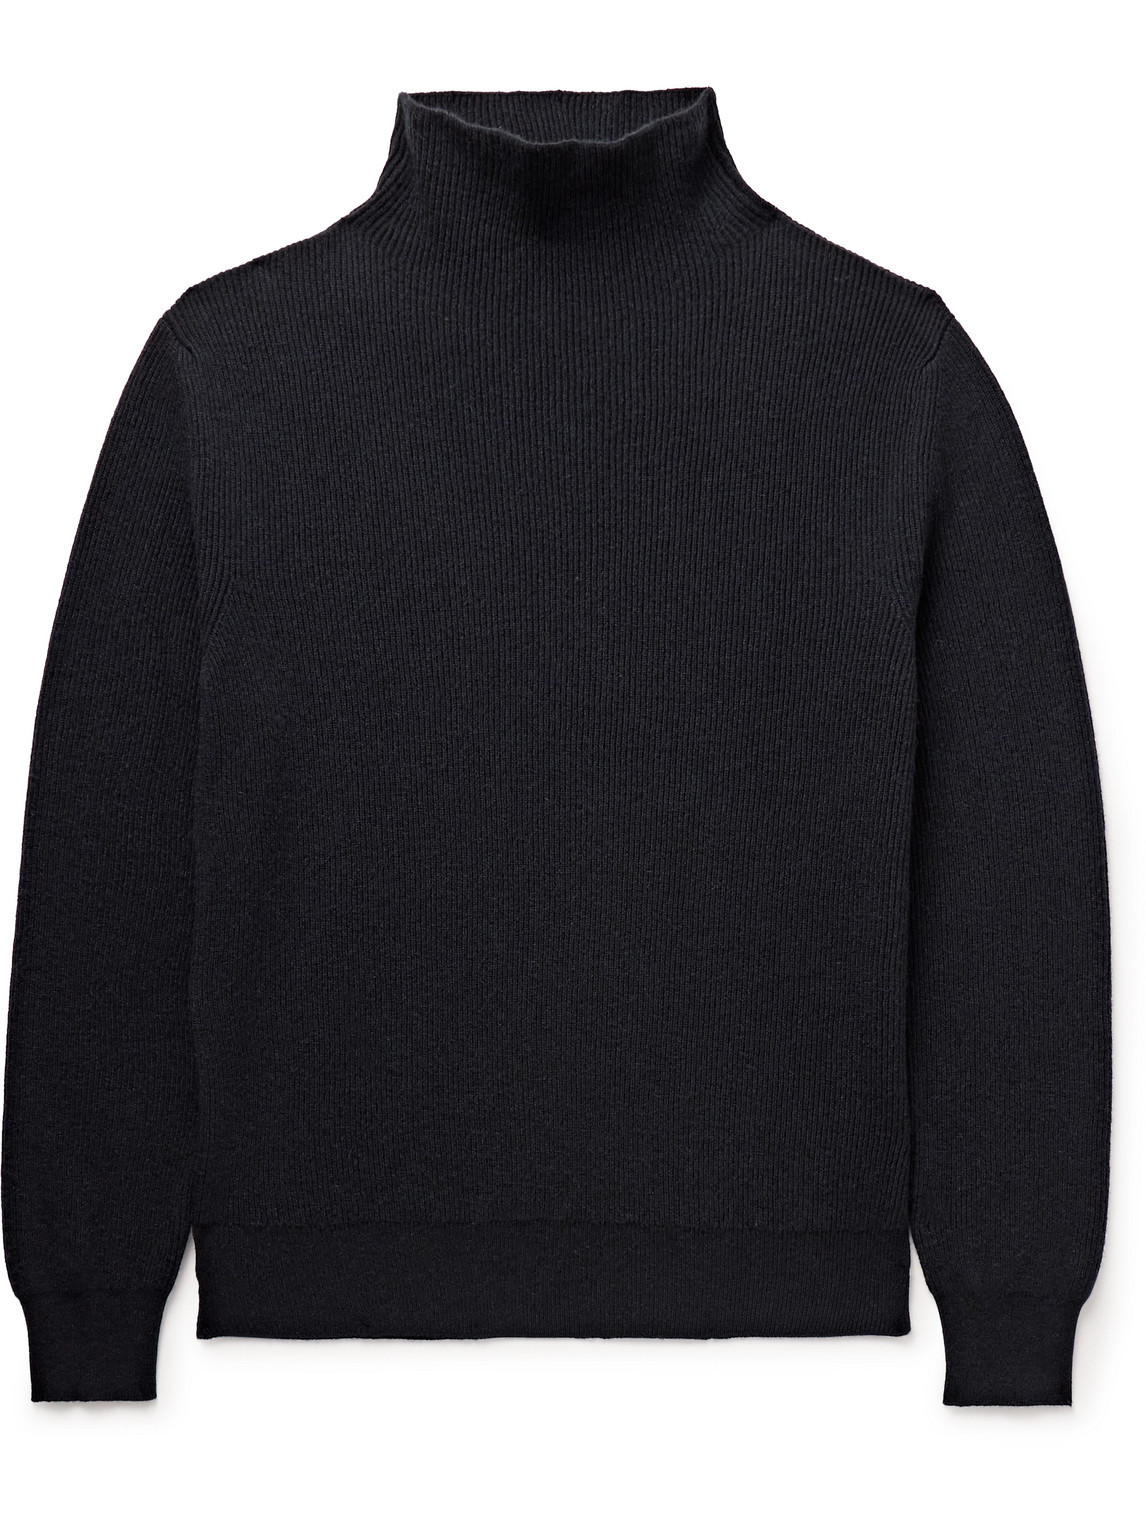 The Row - Daniel Ribbed Cashmere Rollneck Sweater - Men - Blue - S von The Row